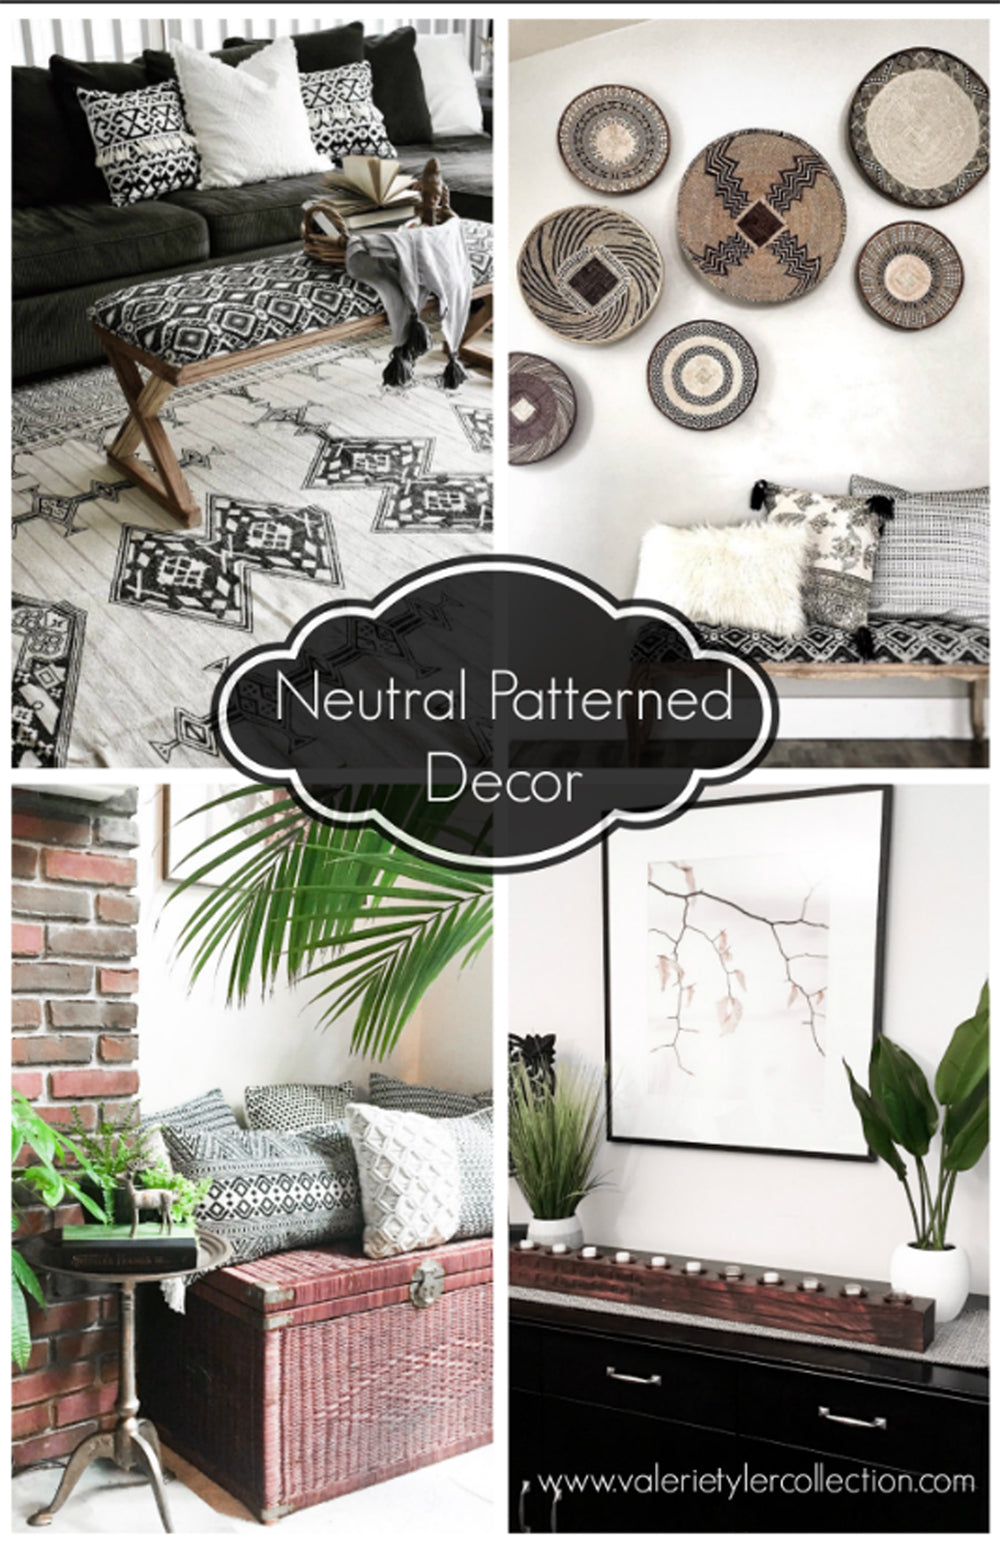 Neutral Patterned Decor